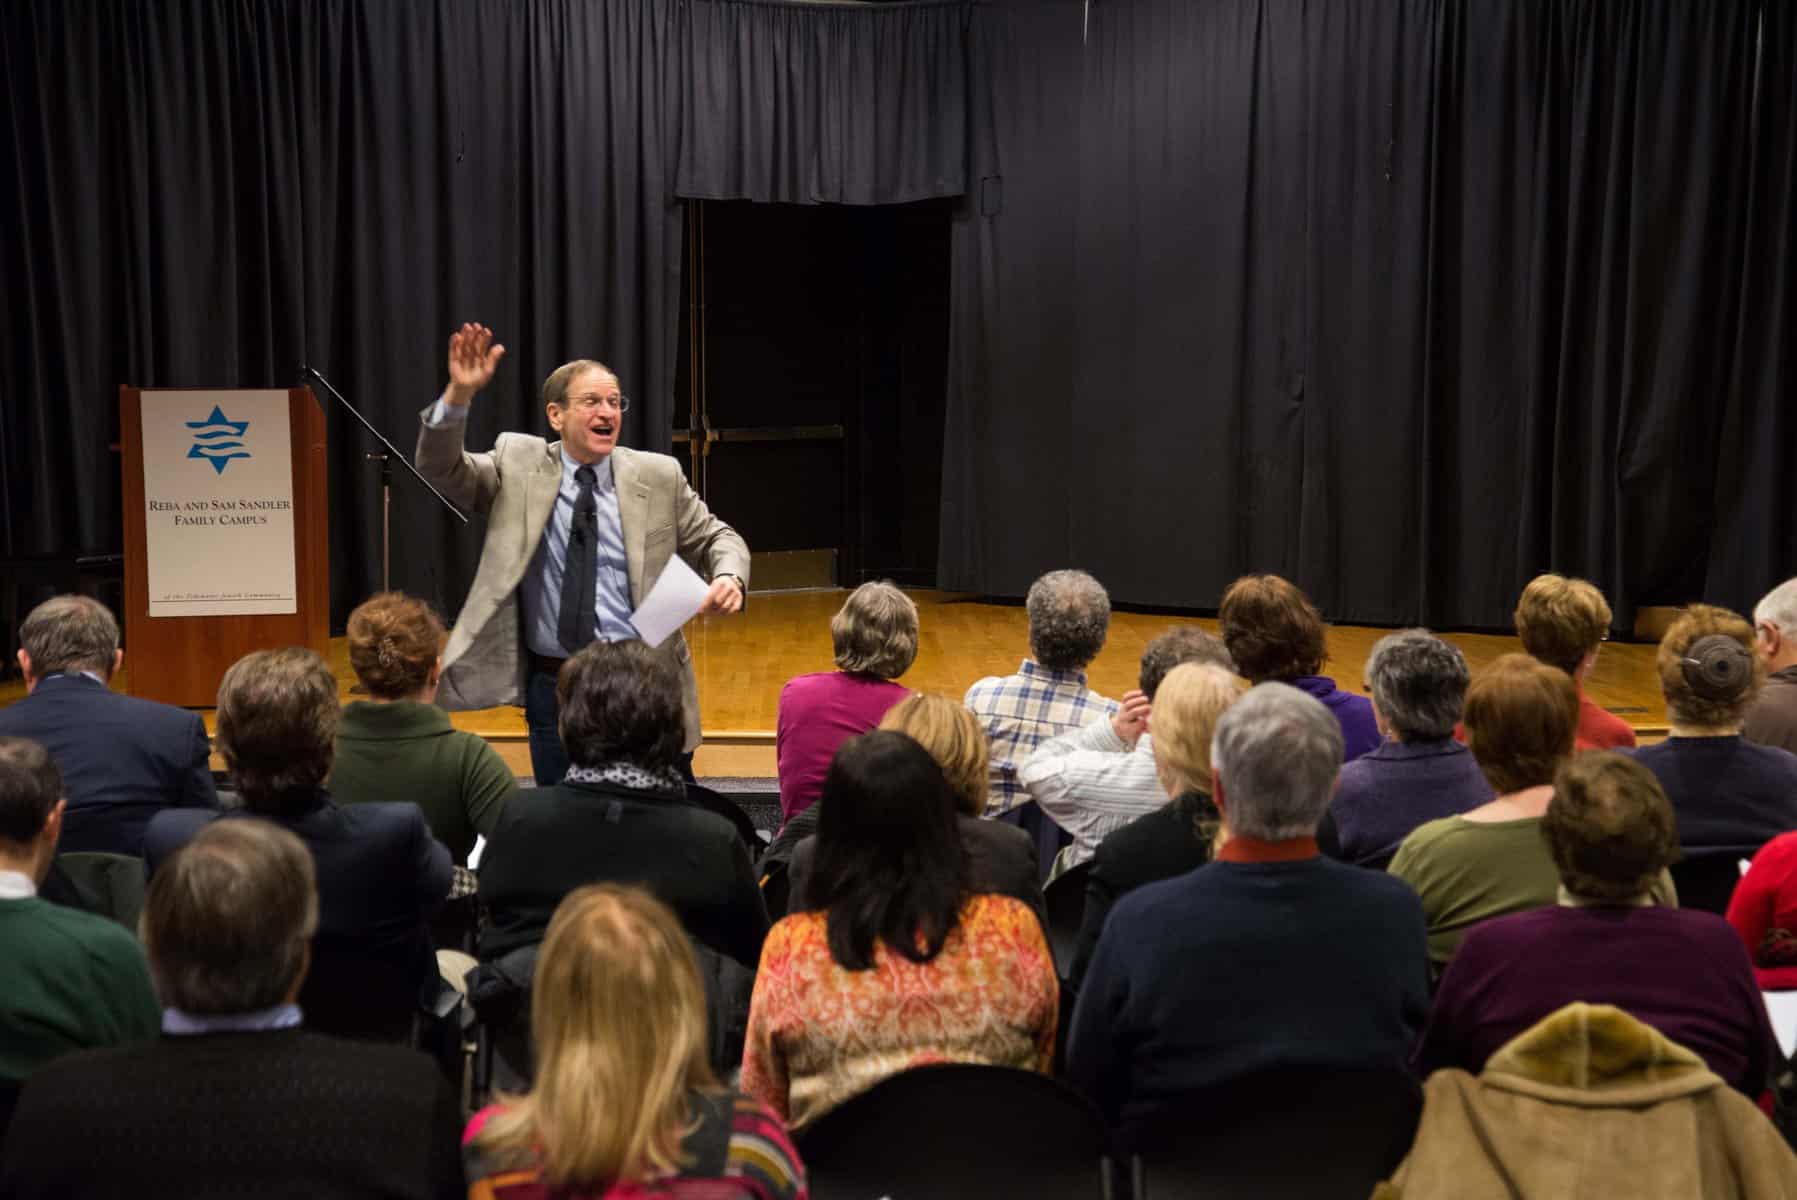 Interspersing humorous stories and personal experiences, Ron Wolfson engages the audience.